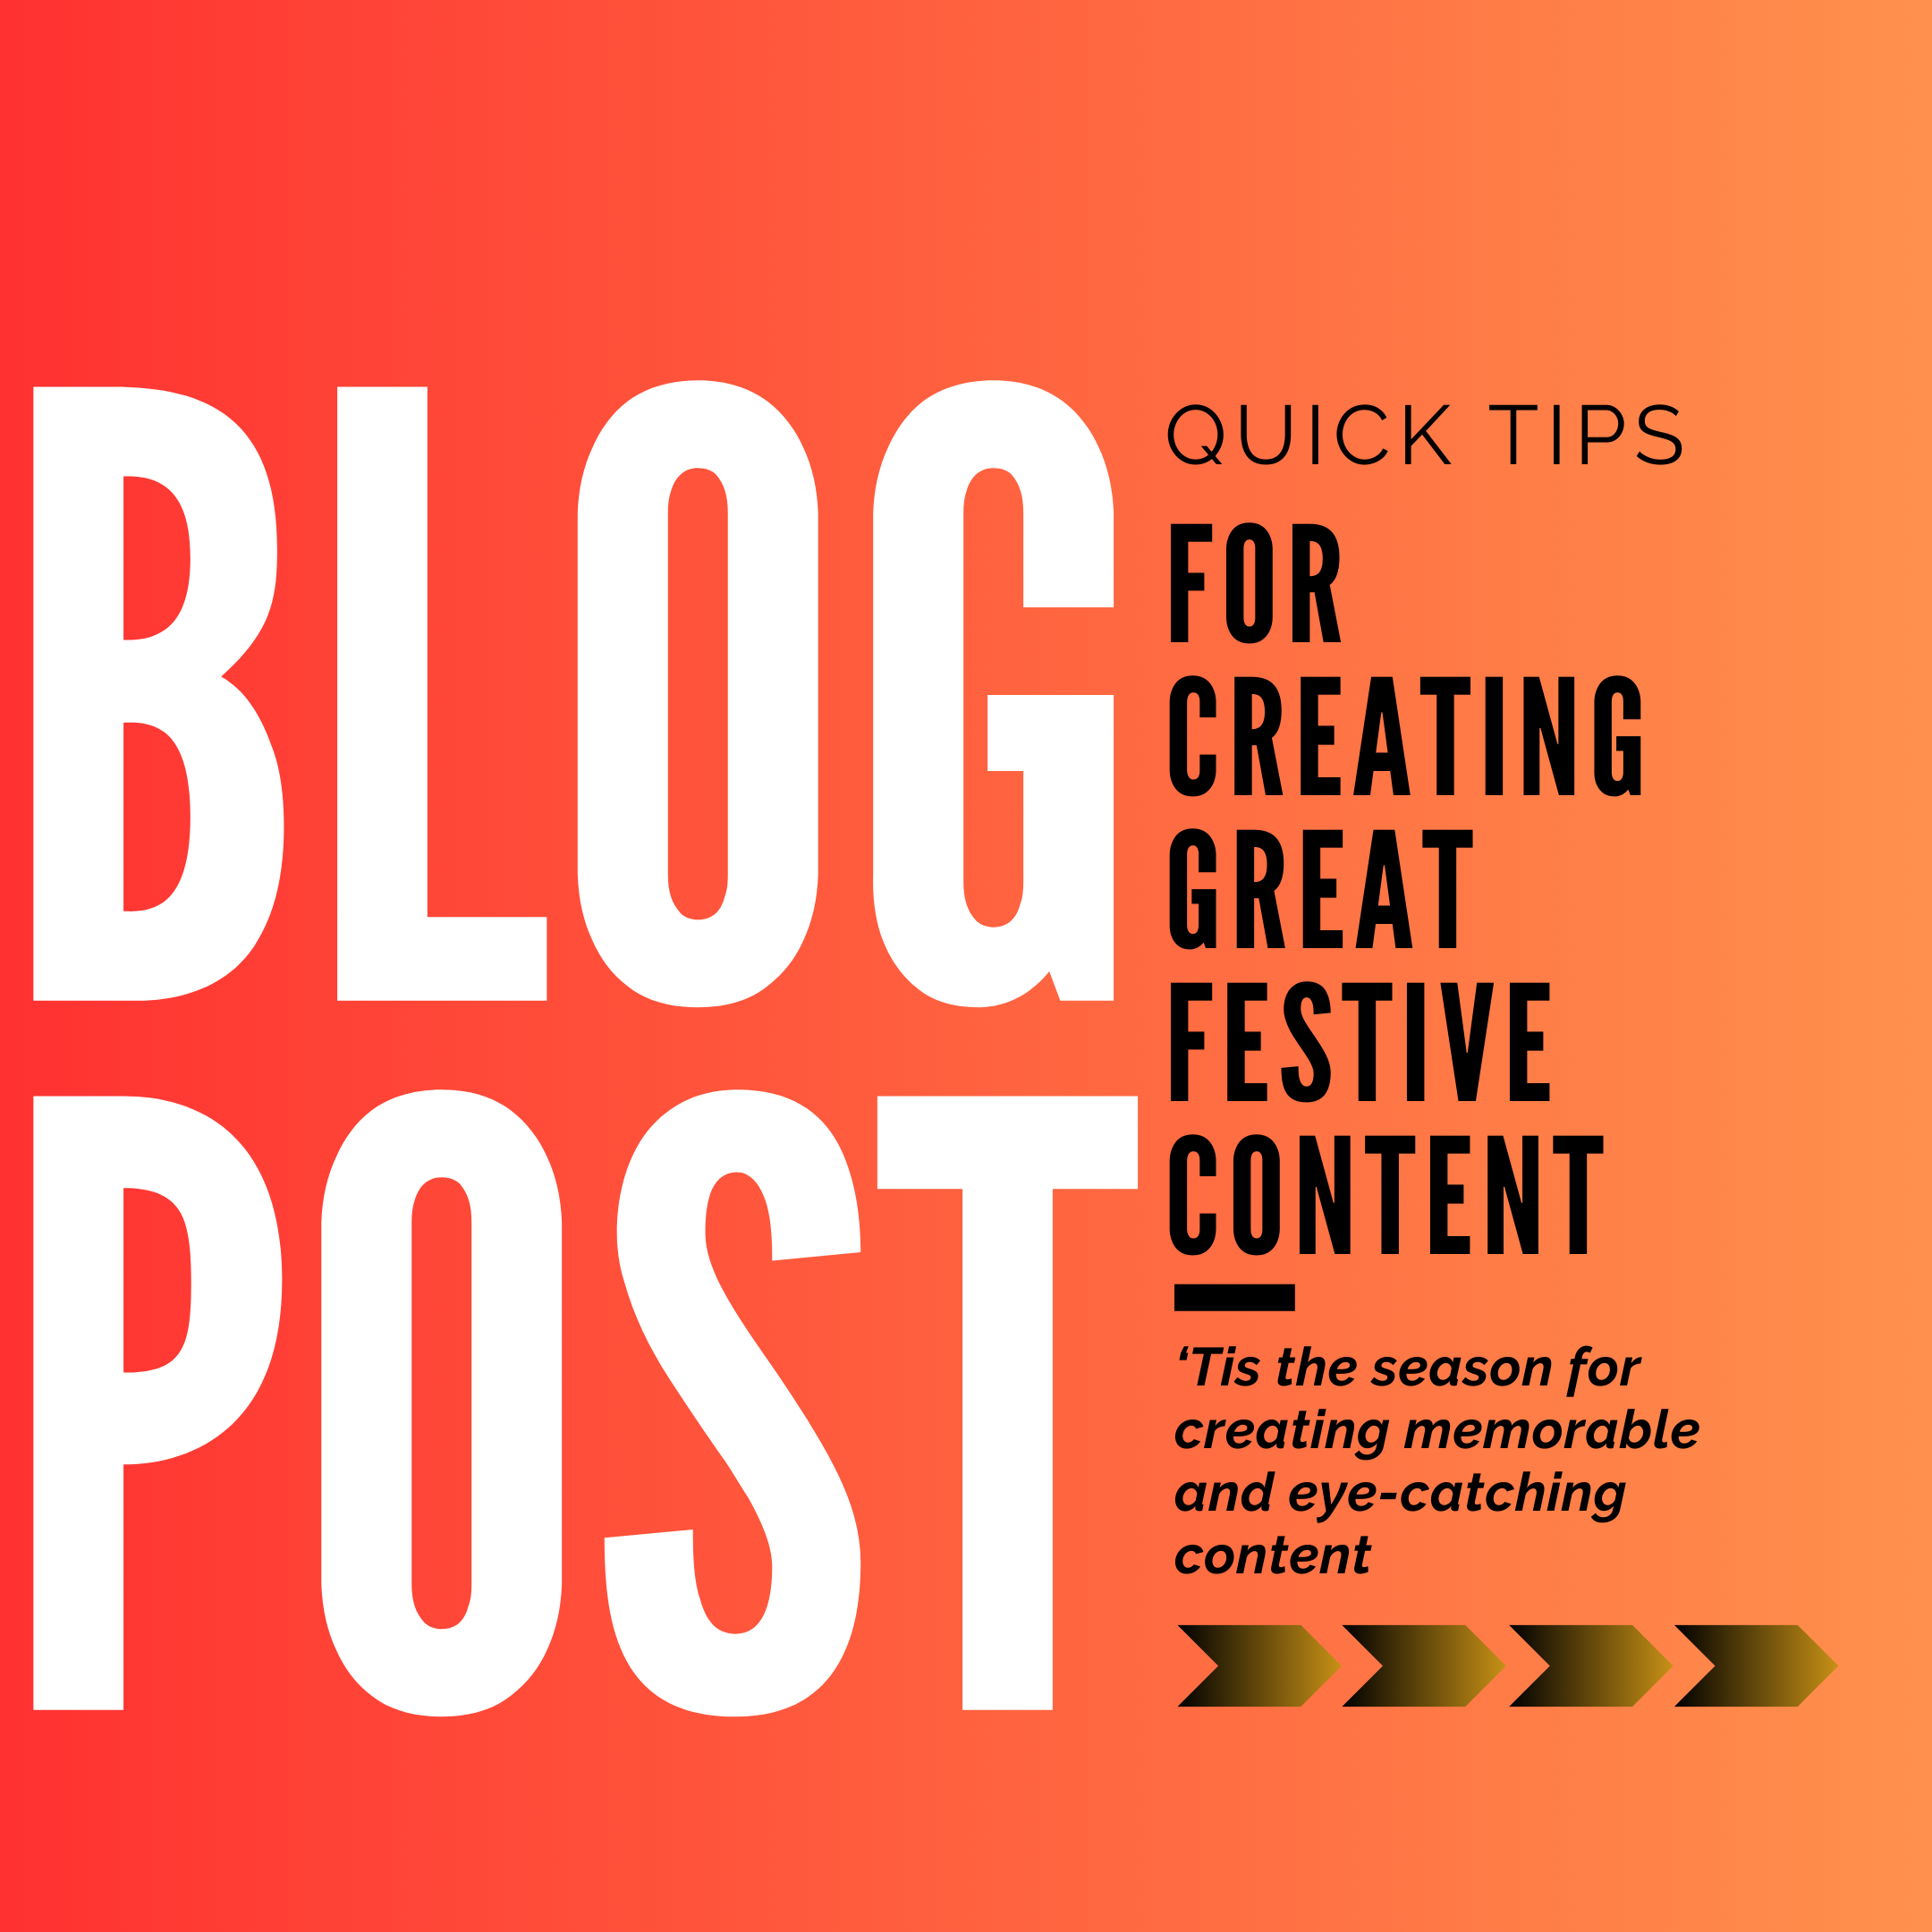 Quick tips for creating great Festive content